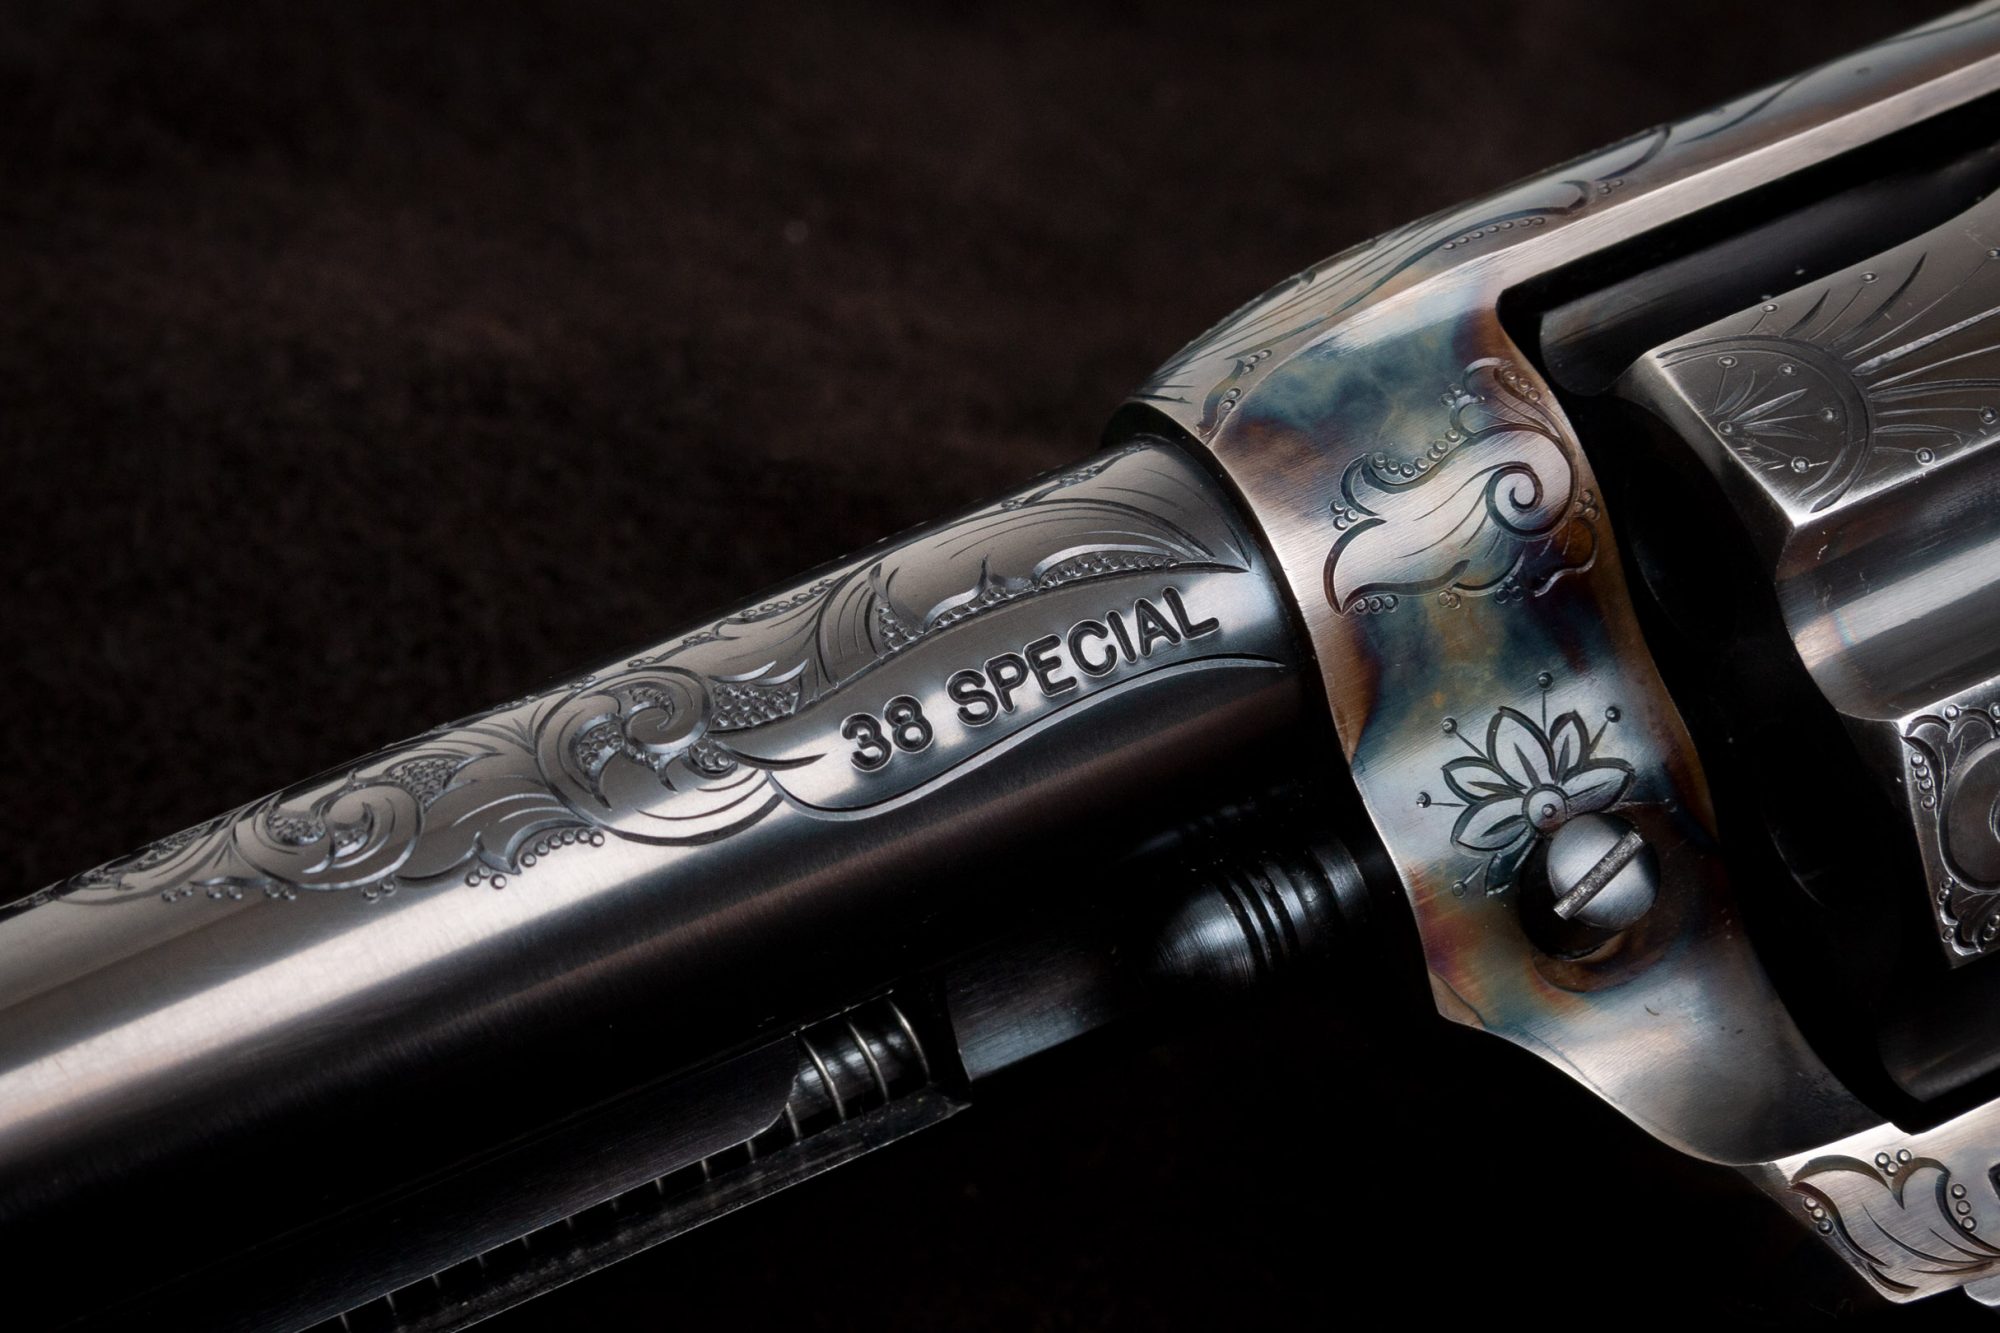 Photo of a pre-owned Turnbull Open Range single action revolver featuring Turnbull color case hardening and other period correct metal finishes, sold as-is through Turnbull Restoration